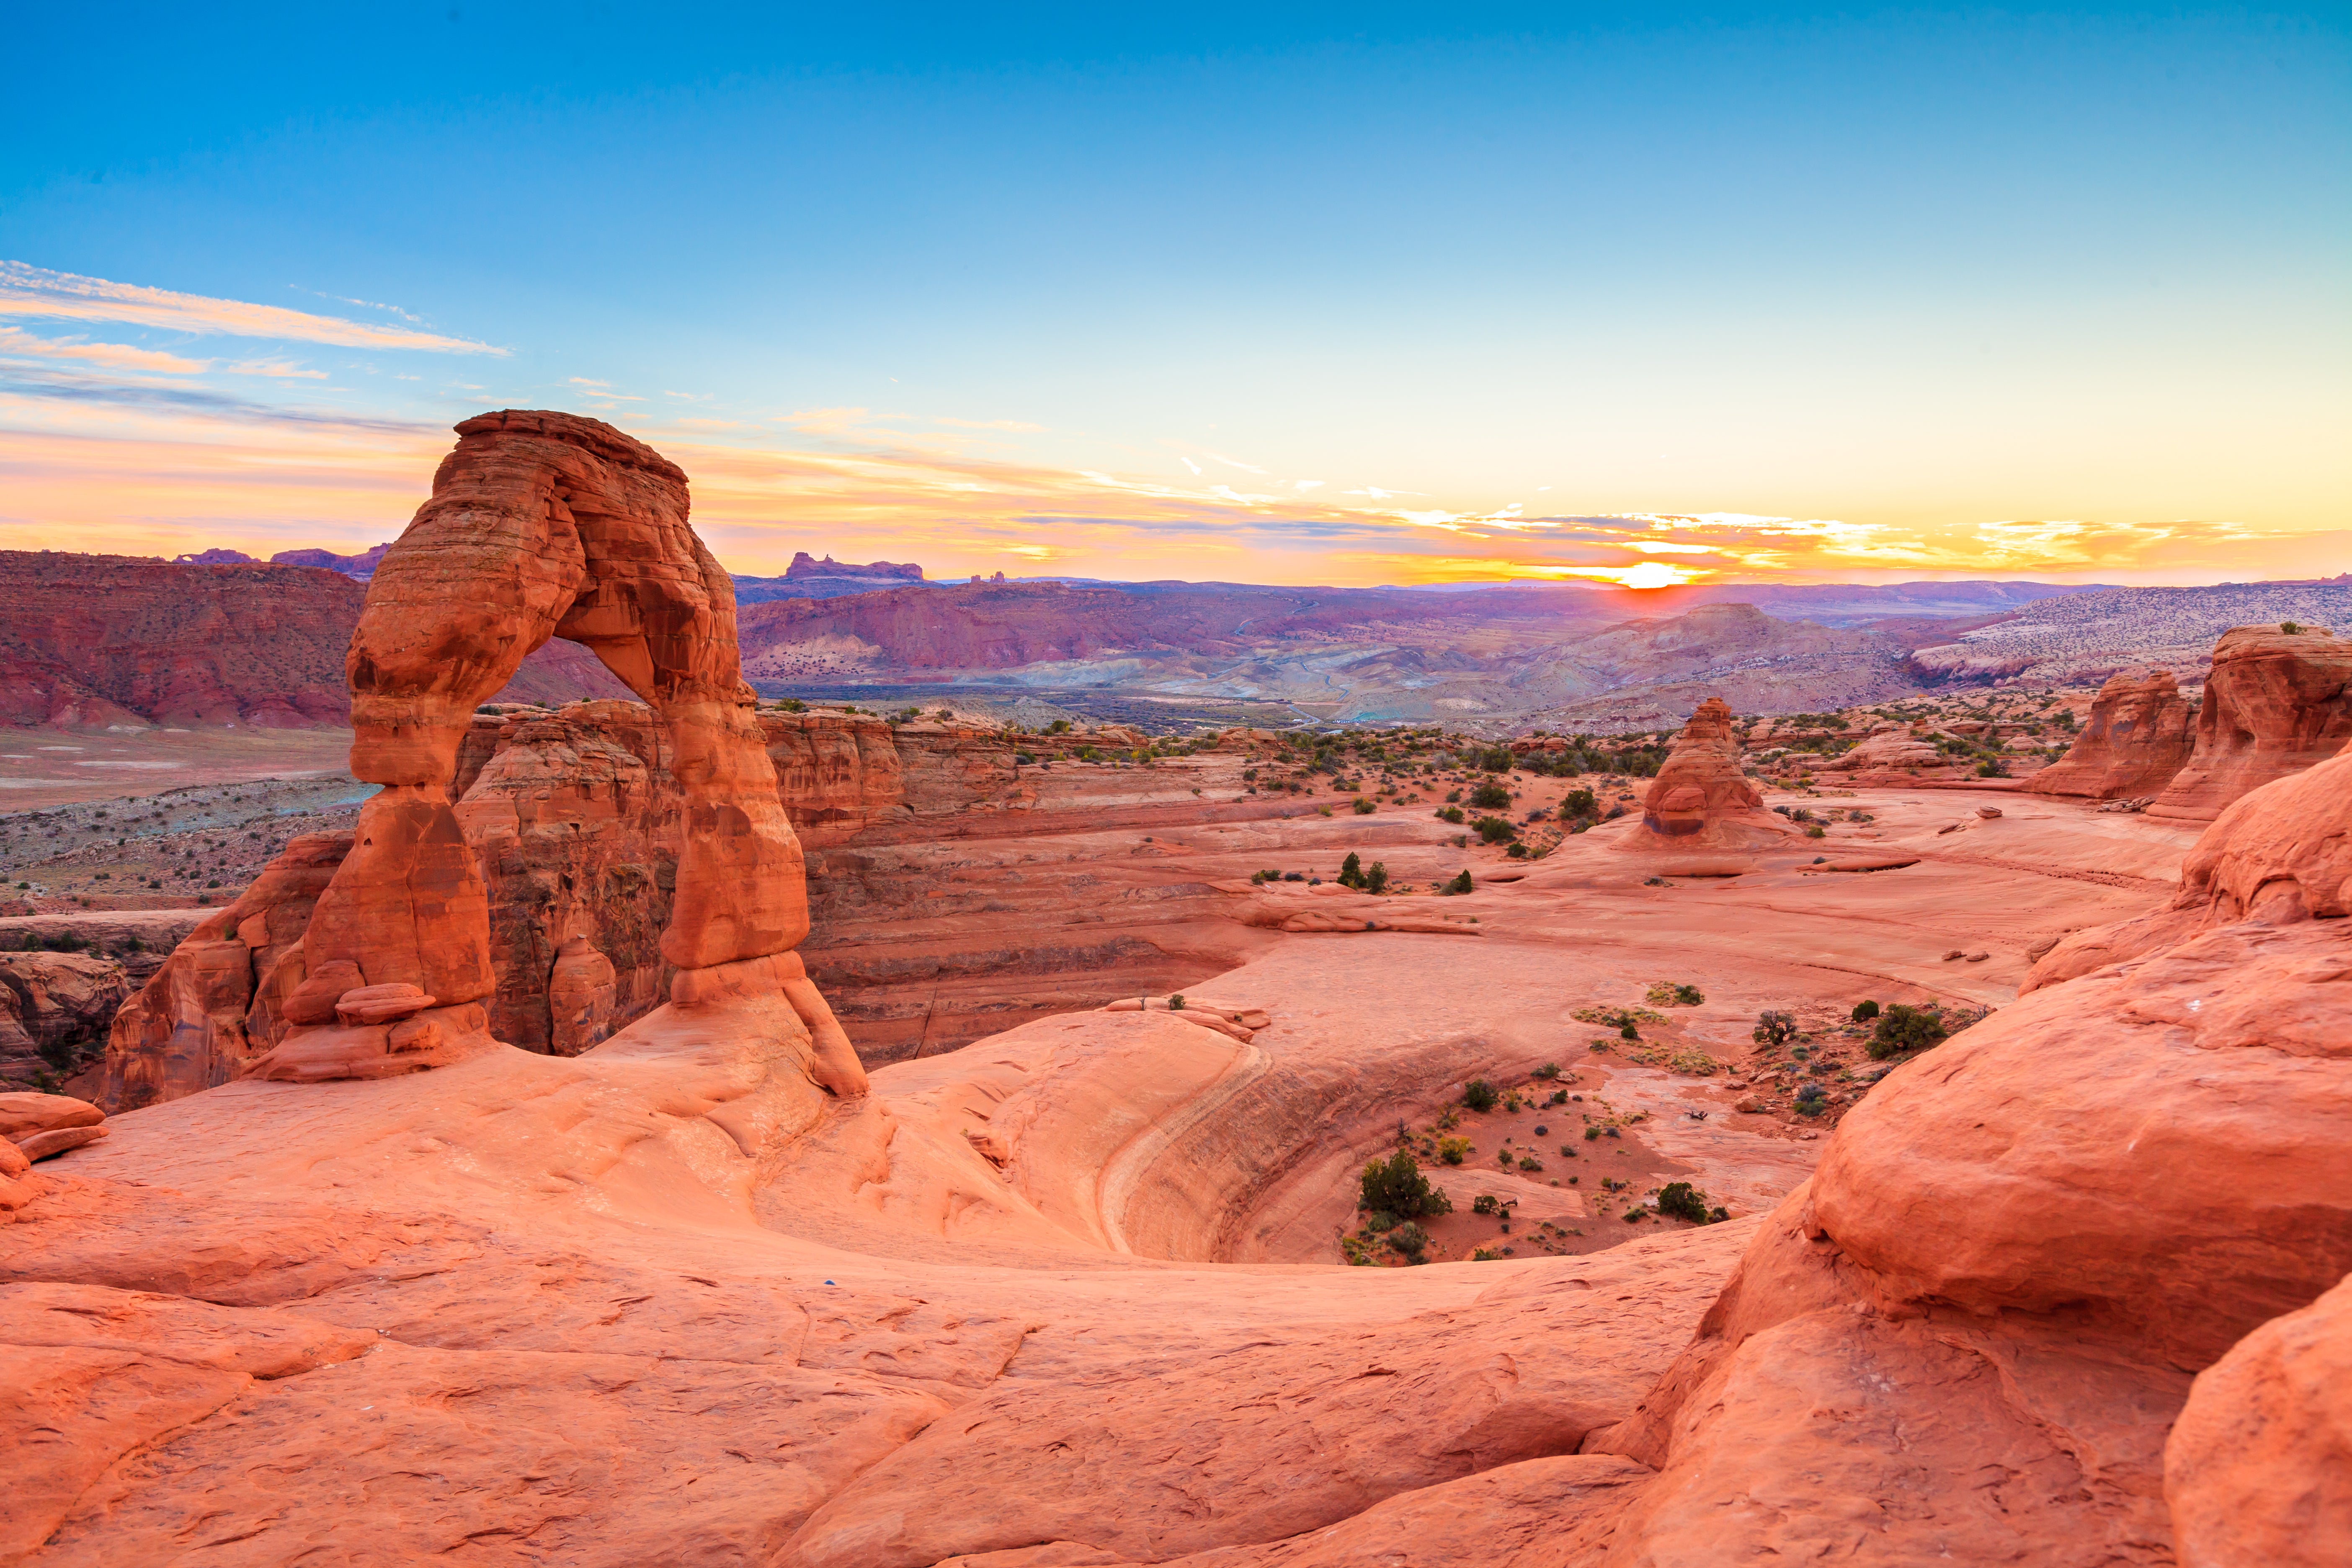 Arches National Park has over 2,000 sandstone arches